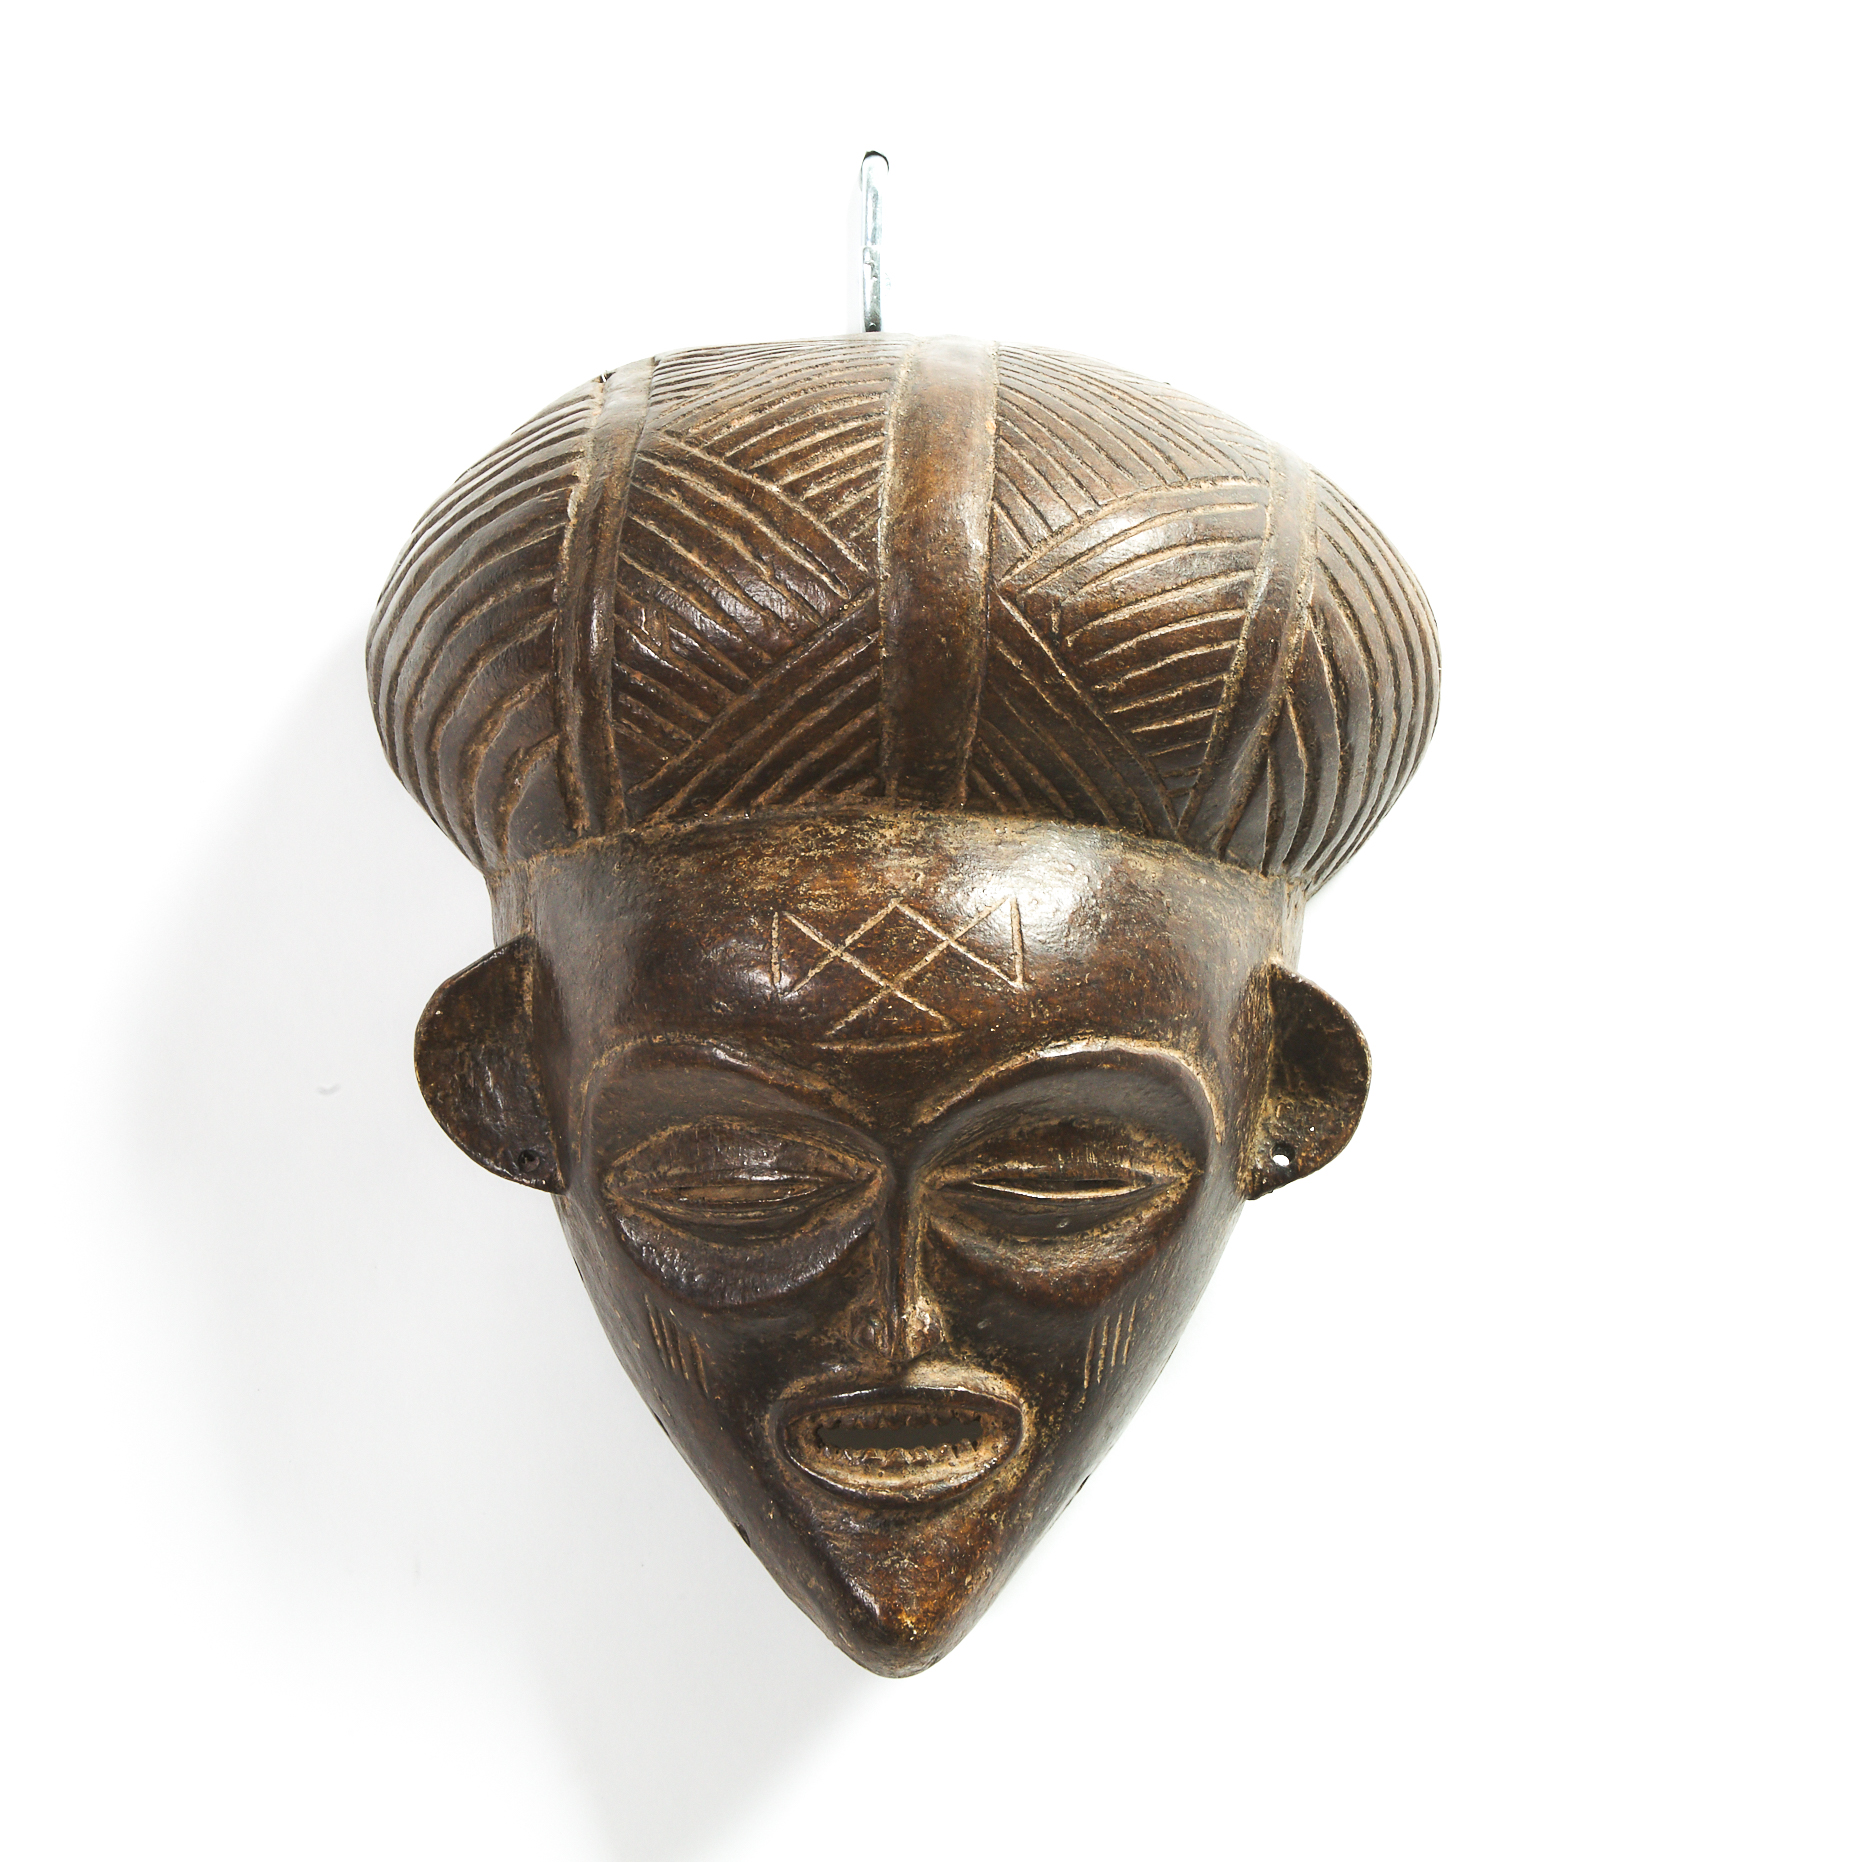 Chokwe Mask, West Africa, early to mid 20th century